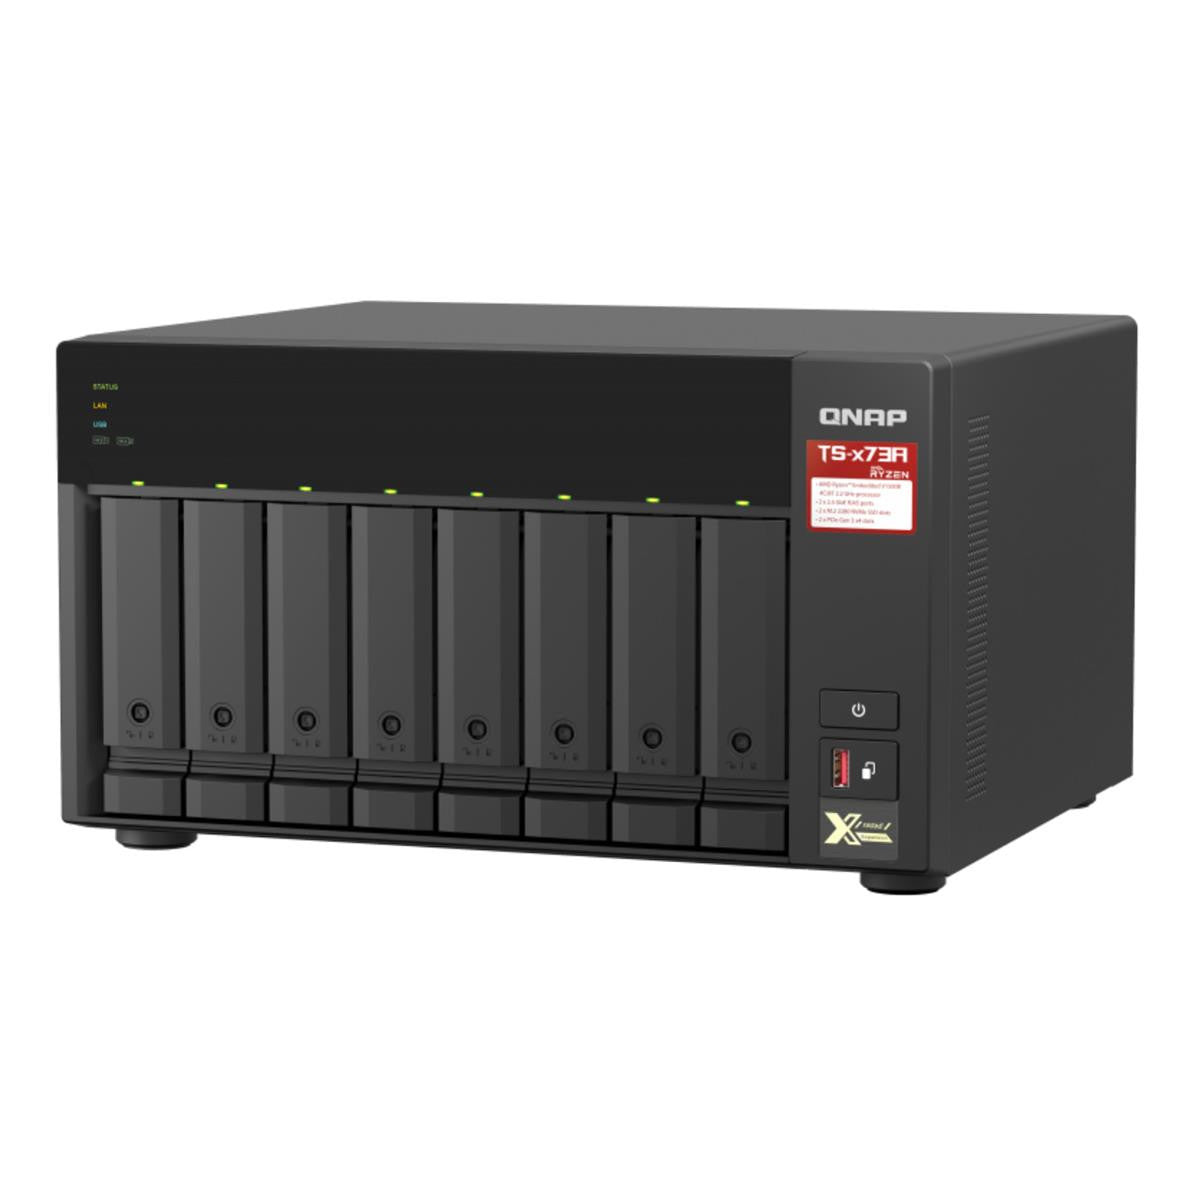 QNAP TS-873A 8-BAY NAS with 8GB DDR4 RAM and 64TB (8x8TB) Western Digital RED PLUS Drives Fully Assembled and Tested